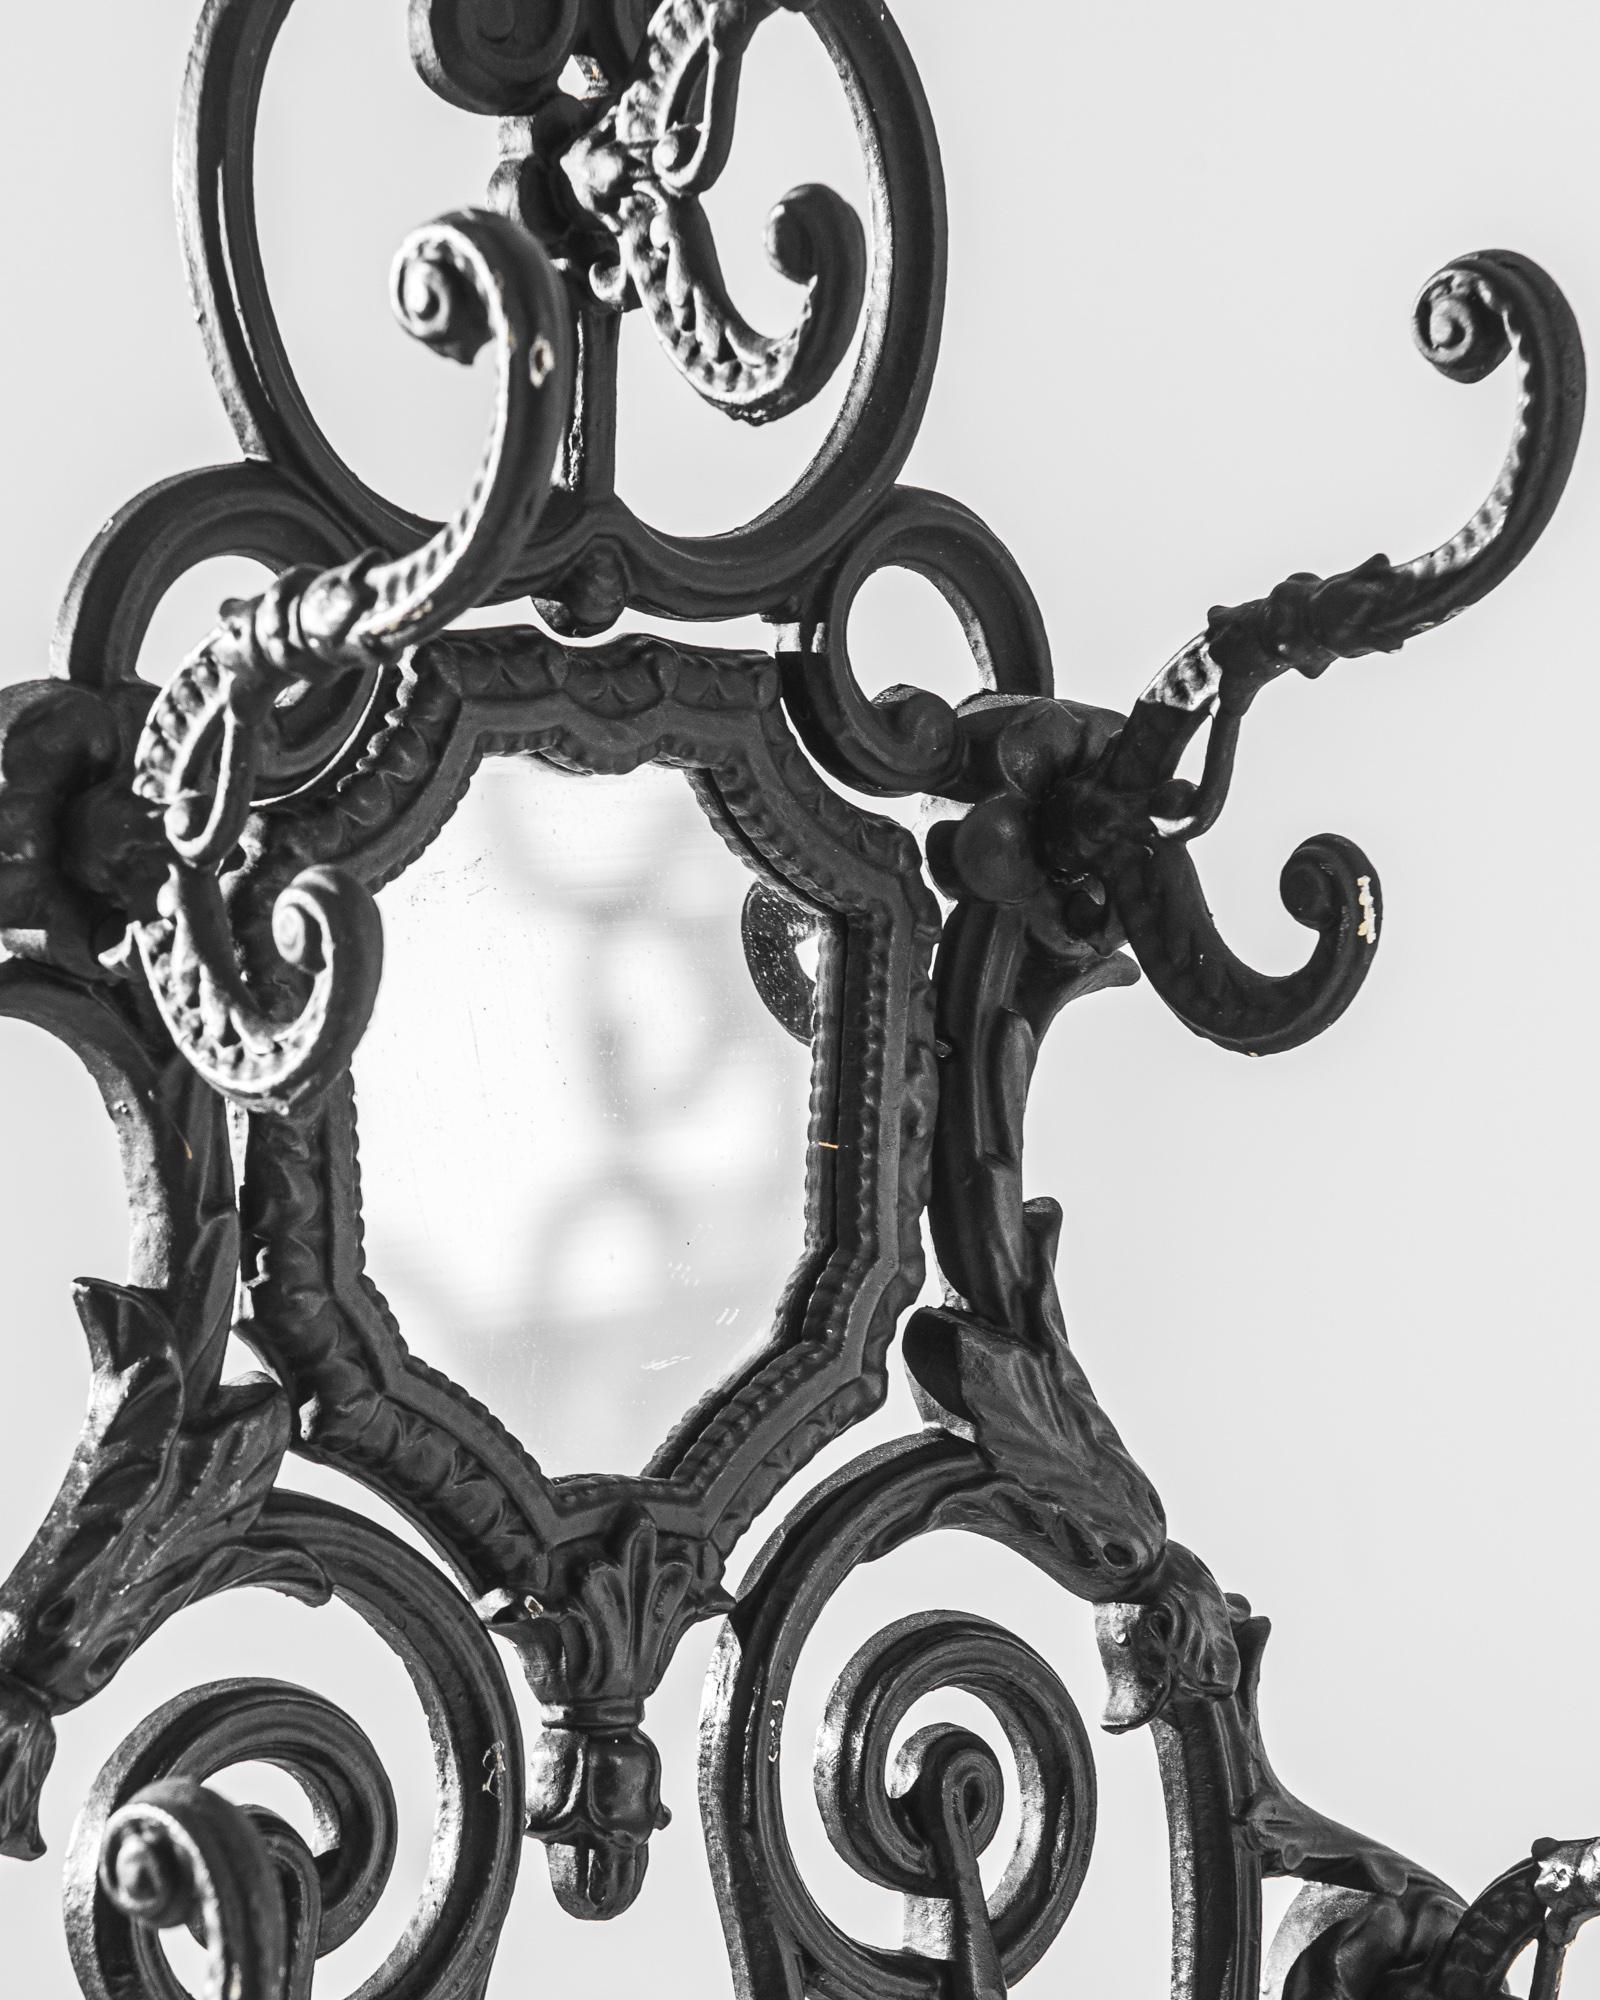 This exquisite 1900s French Iron Rack is a masterpiece of wrought iron craftsmanship, boasting intricate scrollwork and ornamental details that evoke the elegance of the Belle Époque. The dramatic contours and flourishes showcase the artisanal skill